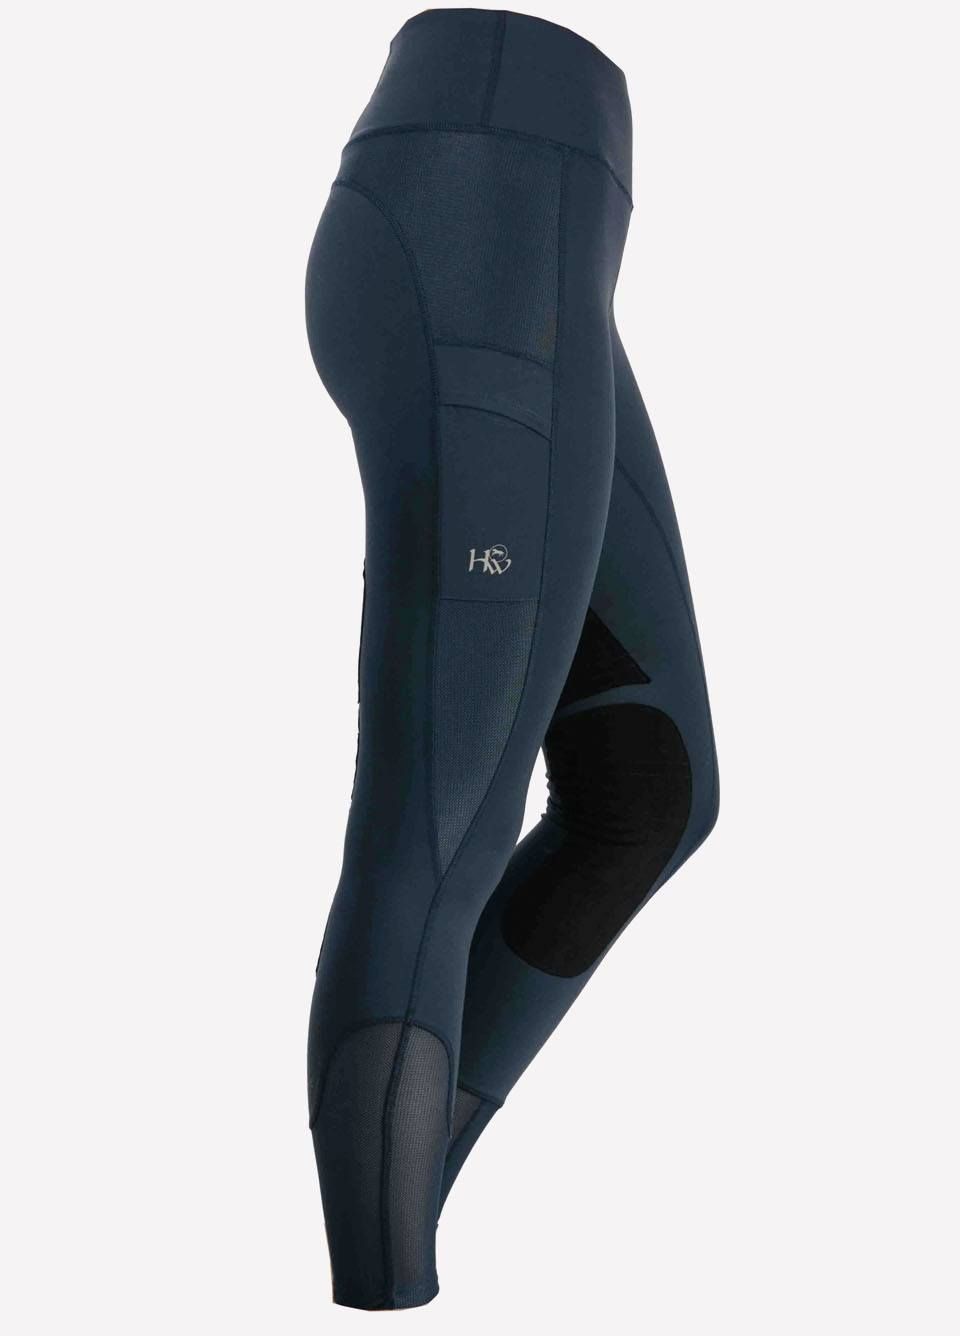 navy tights - Online Discount Shop for Electronics, Apparel, Toys, Books,  Games, Computers, Shoes, Jewelry, Watches, Baby Products, Sports &  Outdoors, Office Products, Bed & Bath, Furniture, Tools, Hardware,  Automotive Parts, Accessories